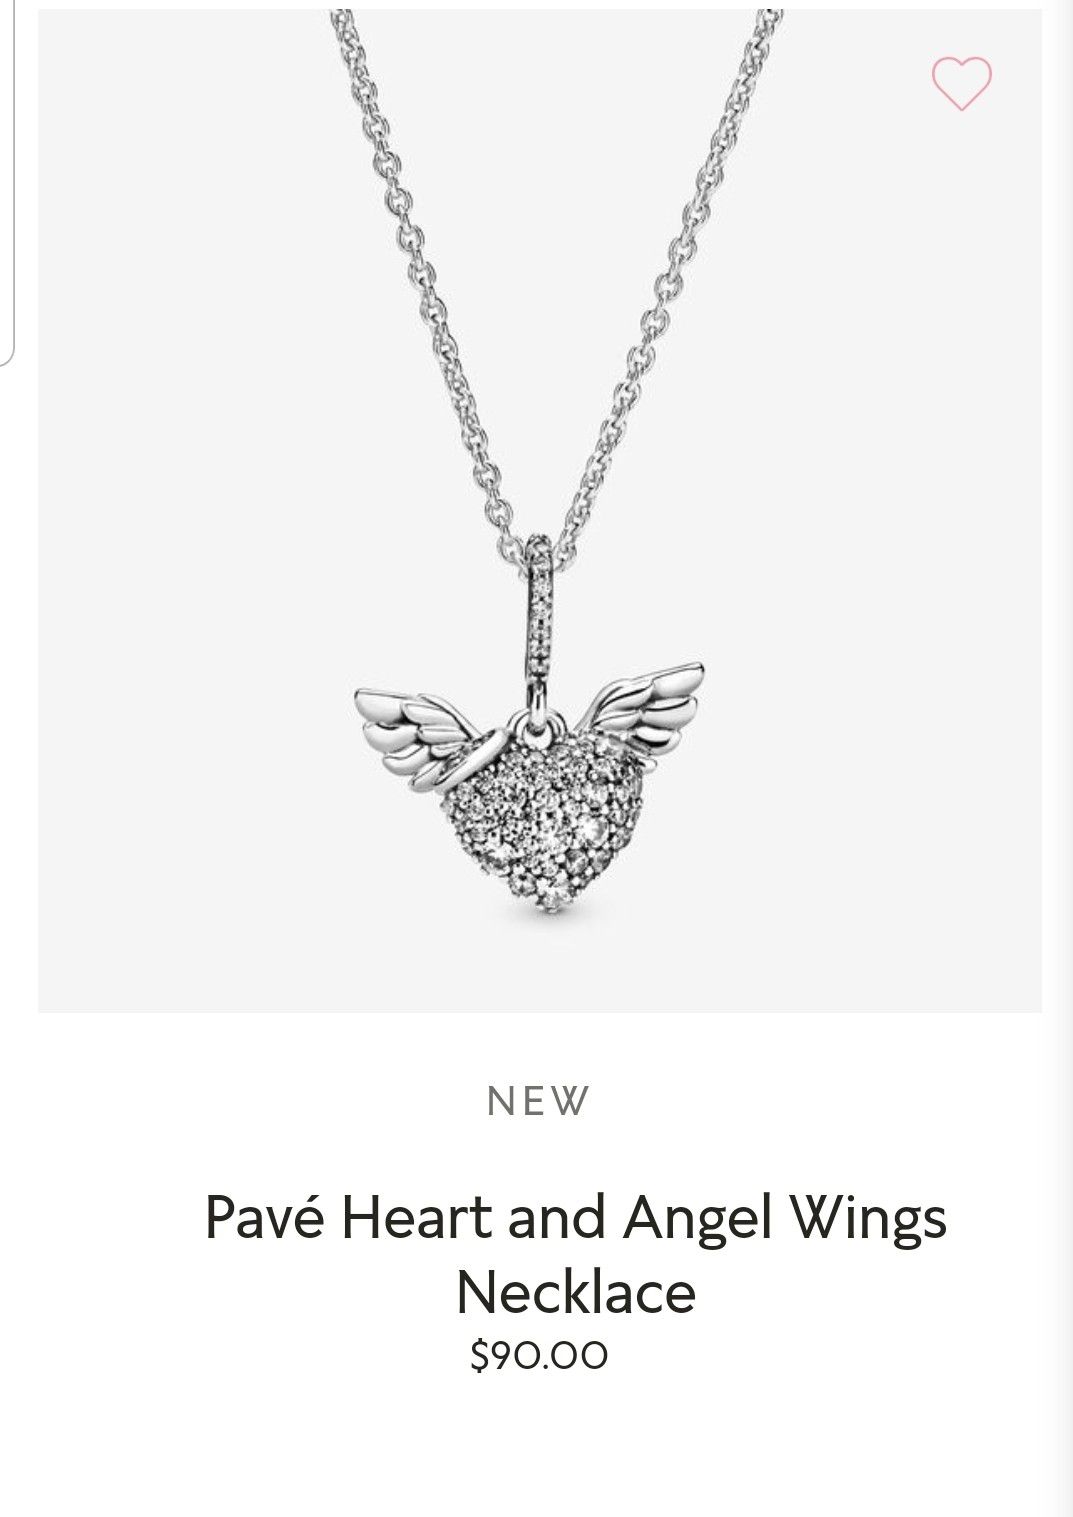 Pandora pave heart & angel wings necklace